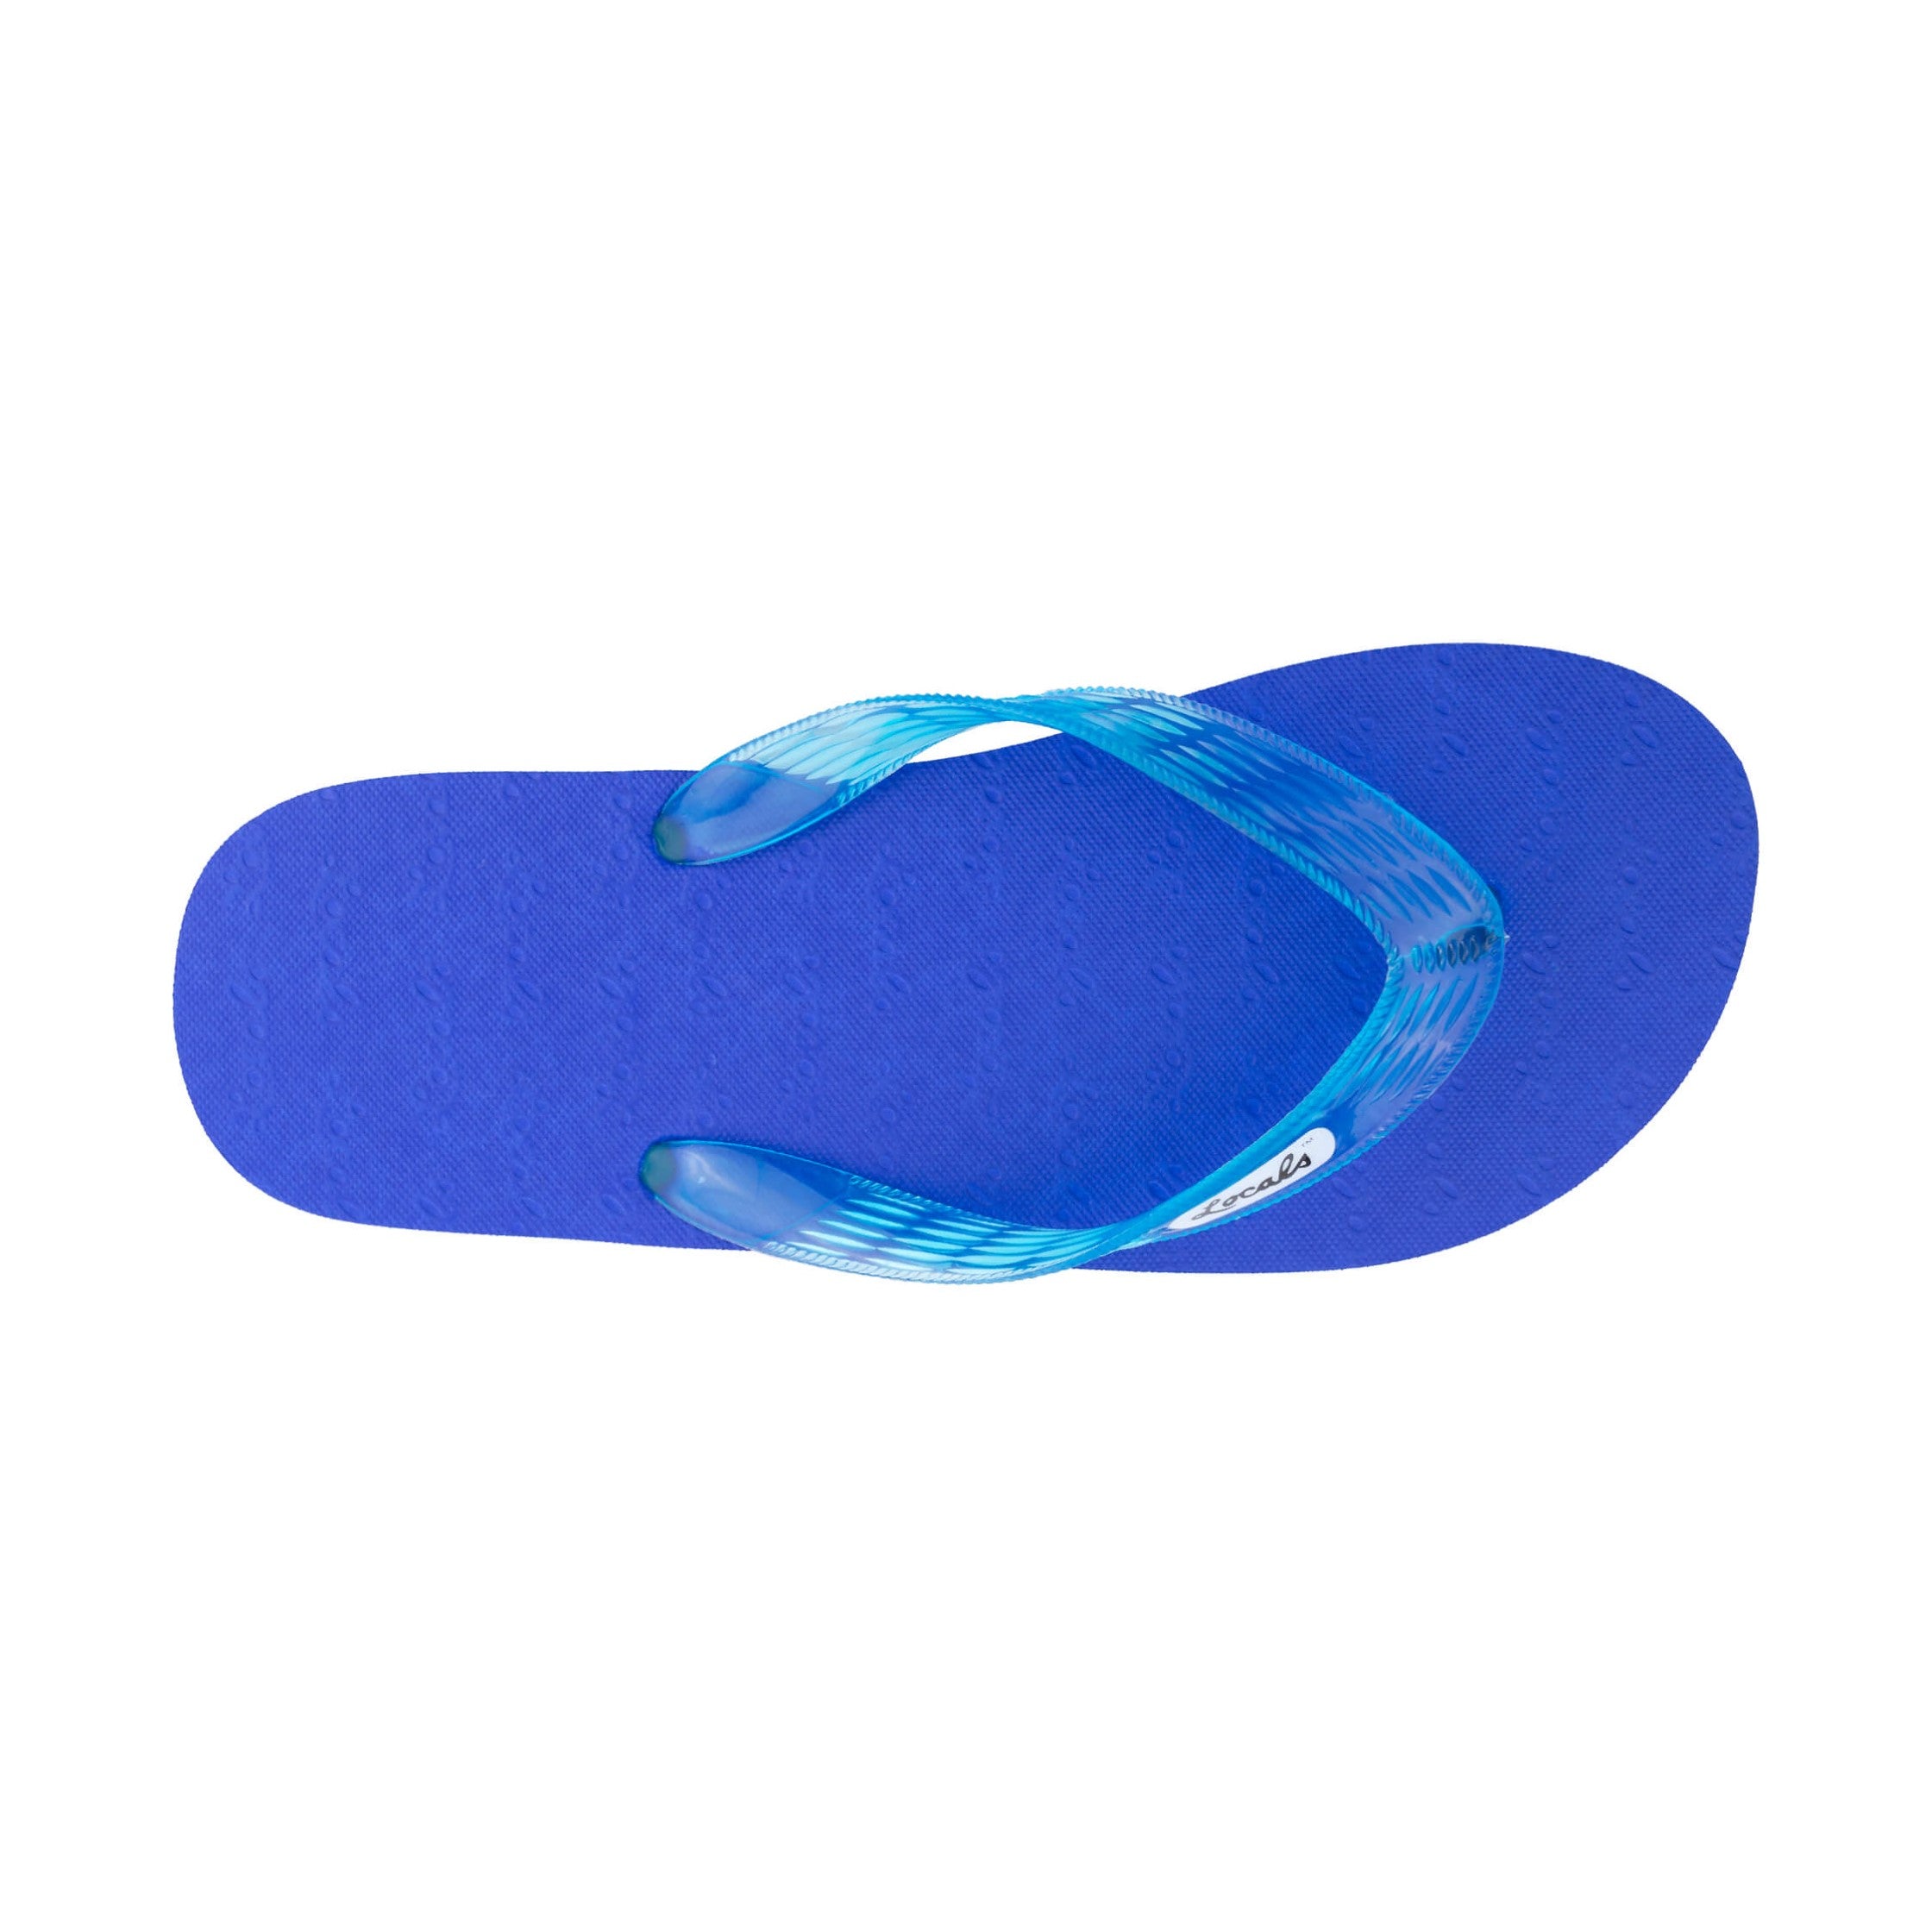 Locals Unisex Stripe Ocean Flip Flops featuring a Blue/Turquoise platform with a White stripe and a Translucent Turquoise strap.